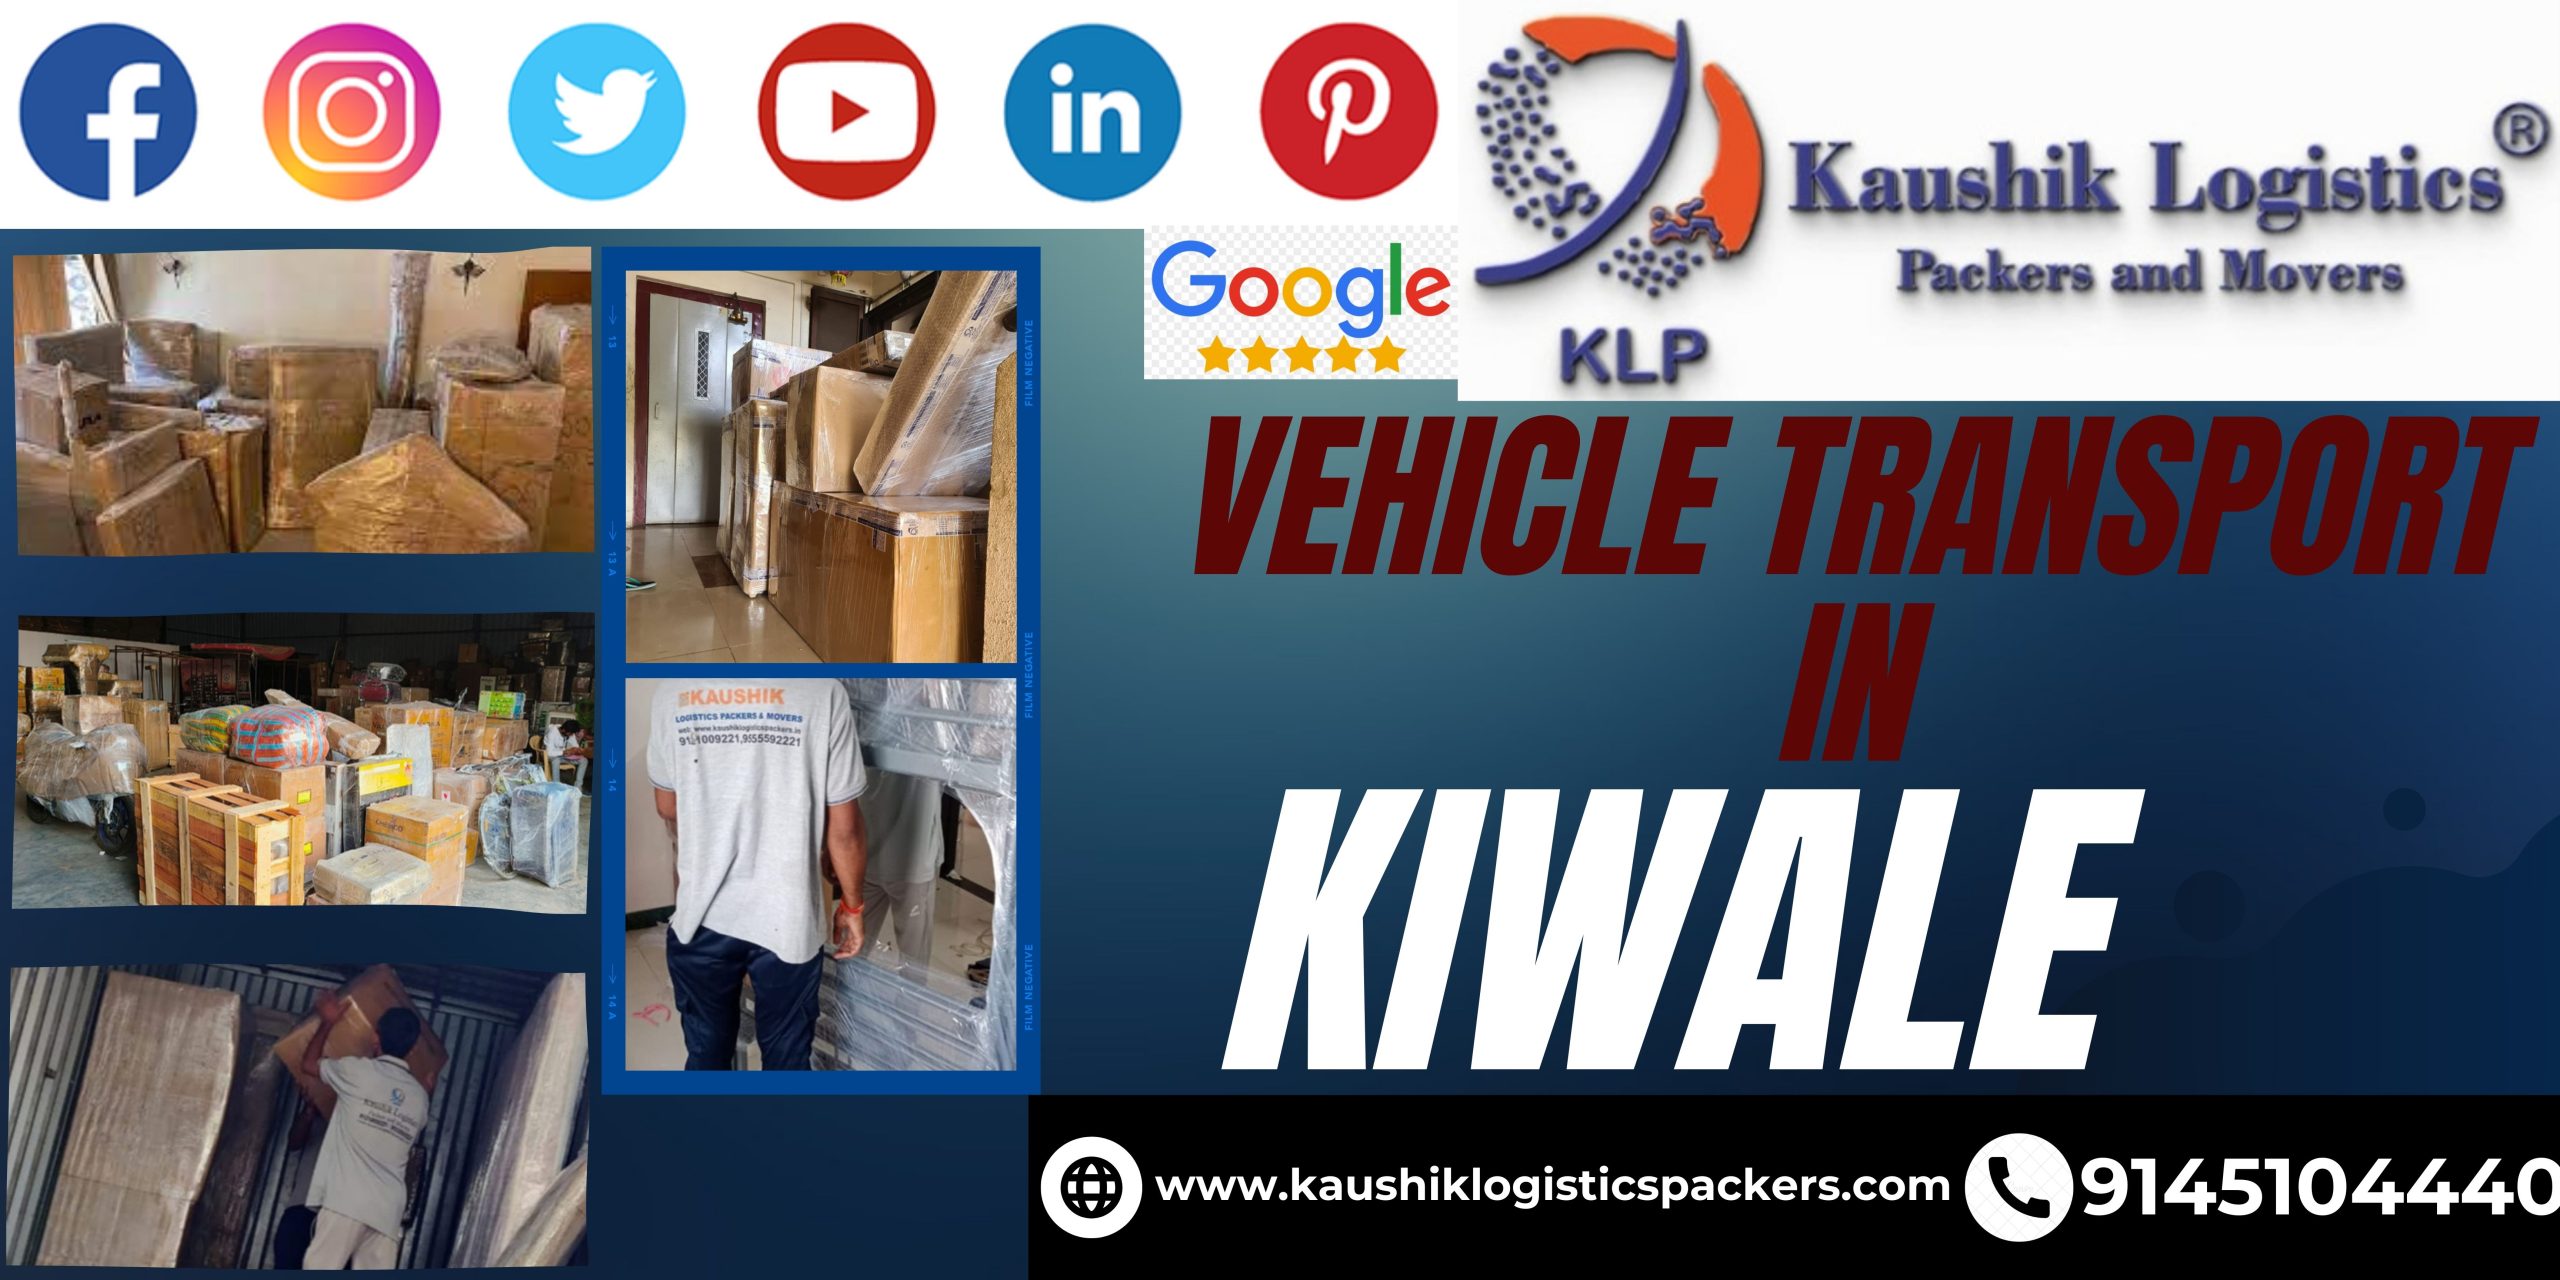 Packers and Movers In Kiwale